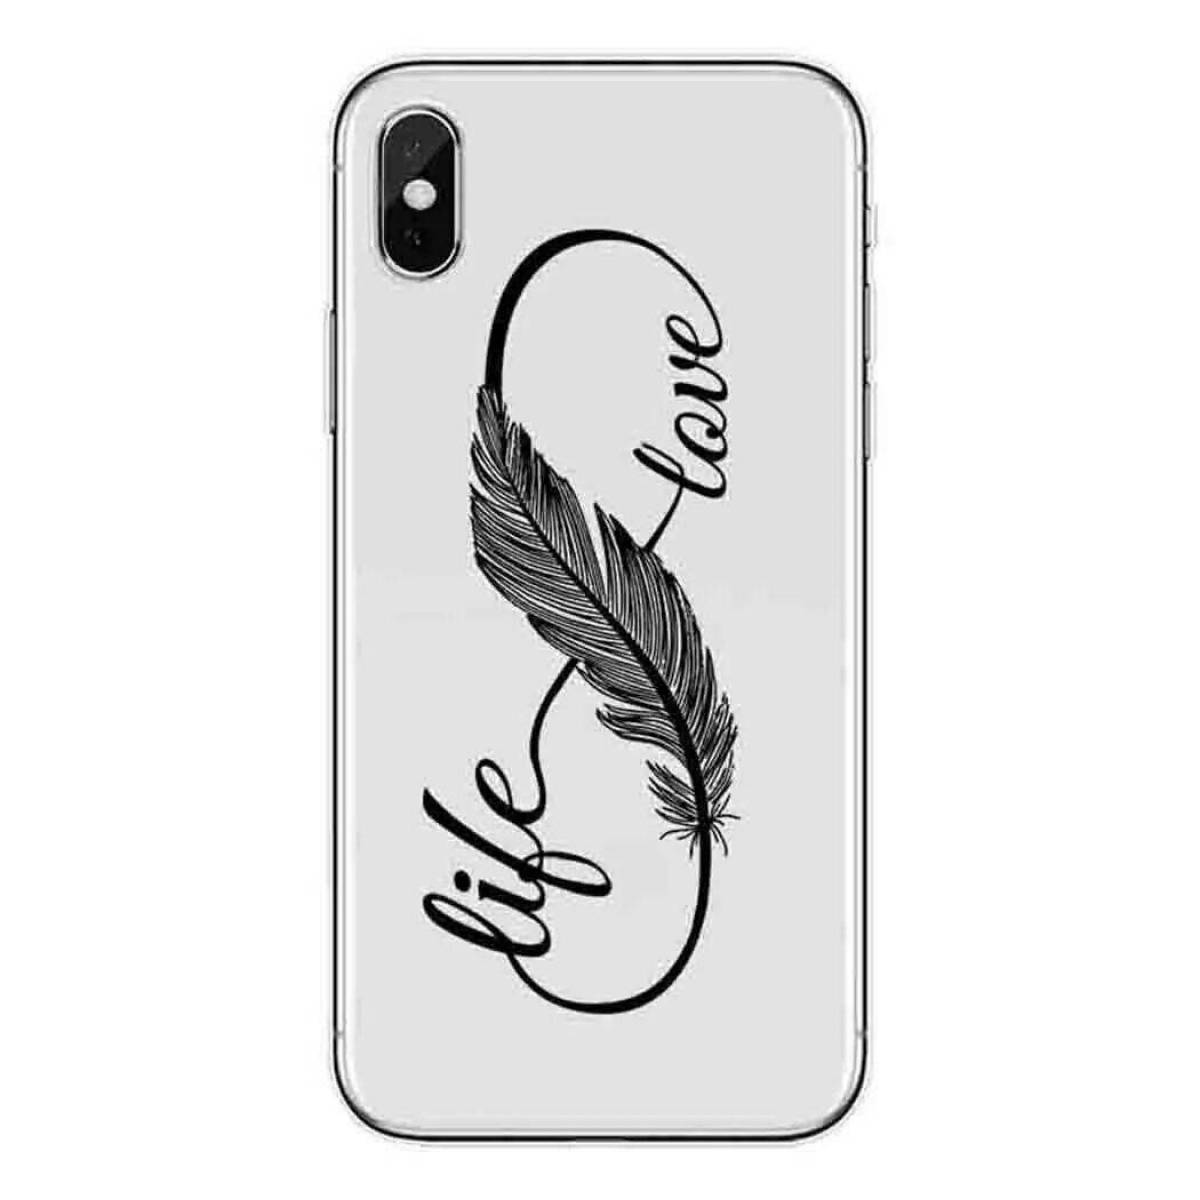 Creative phone case design coloring page